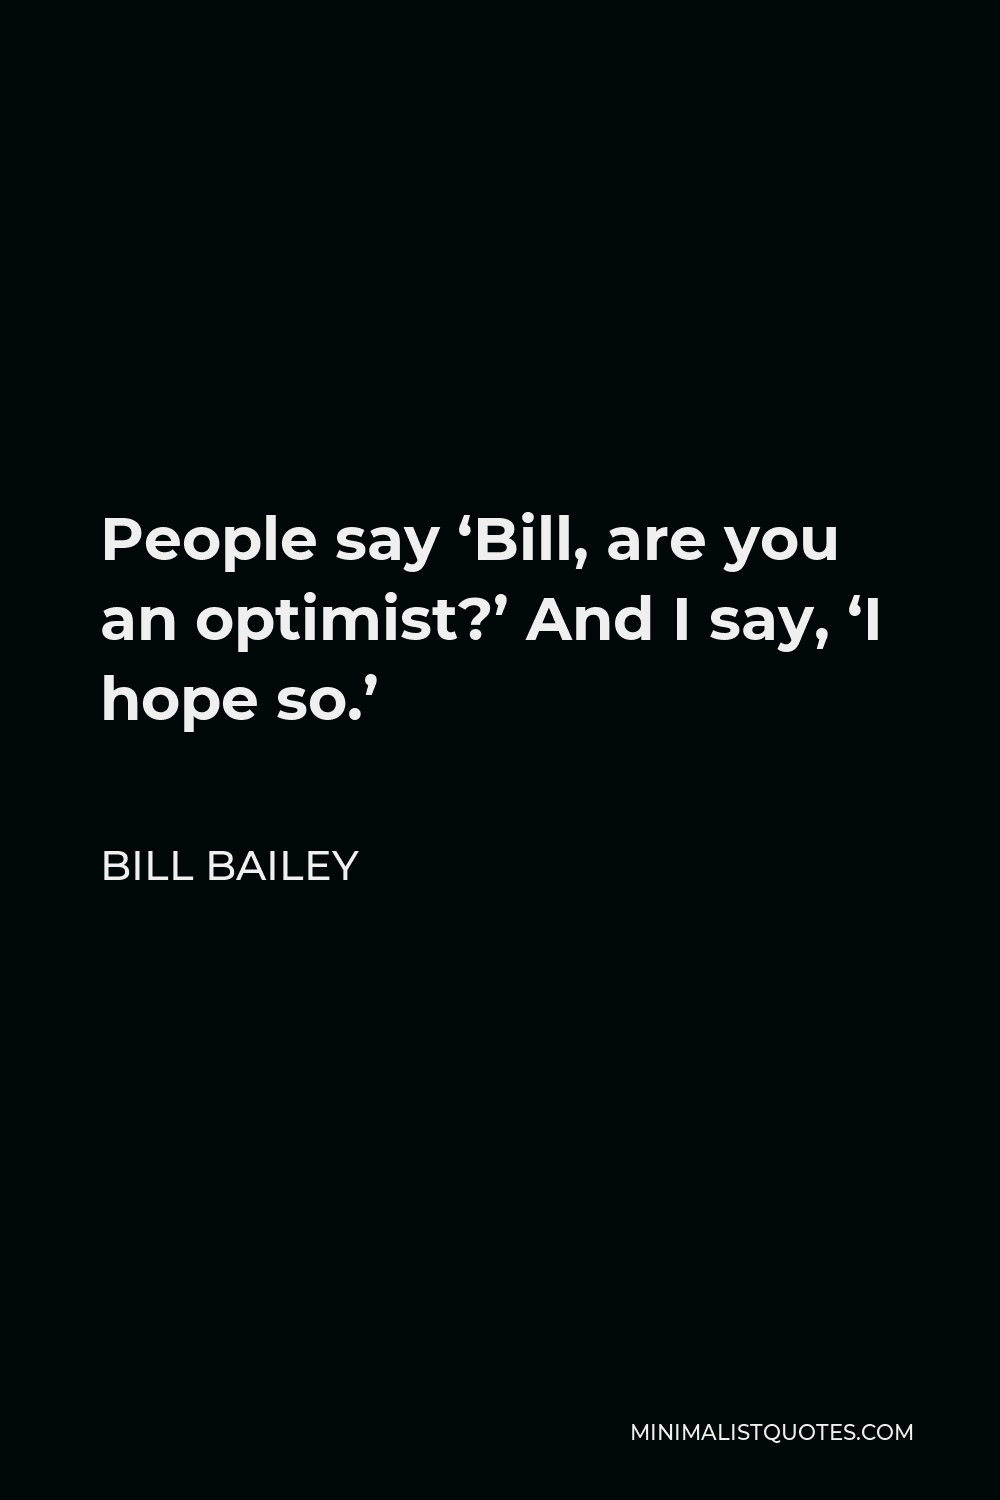 Bill Bailey Quote - People say ‘Bill, are you an optimist?’ And I say, ‘I hope so.’